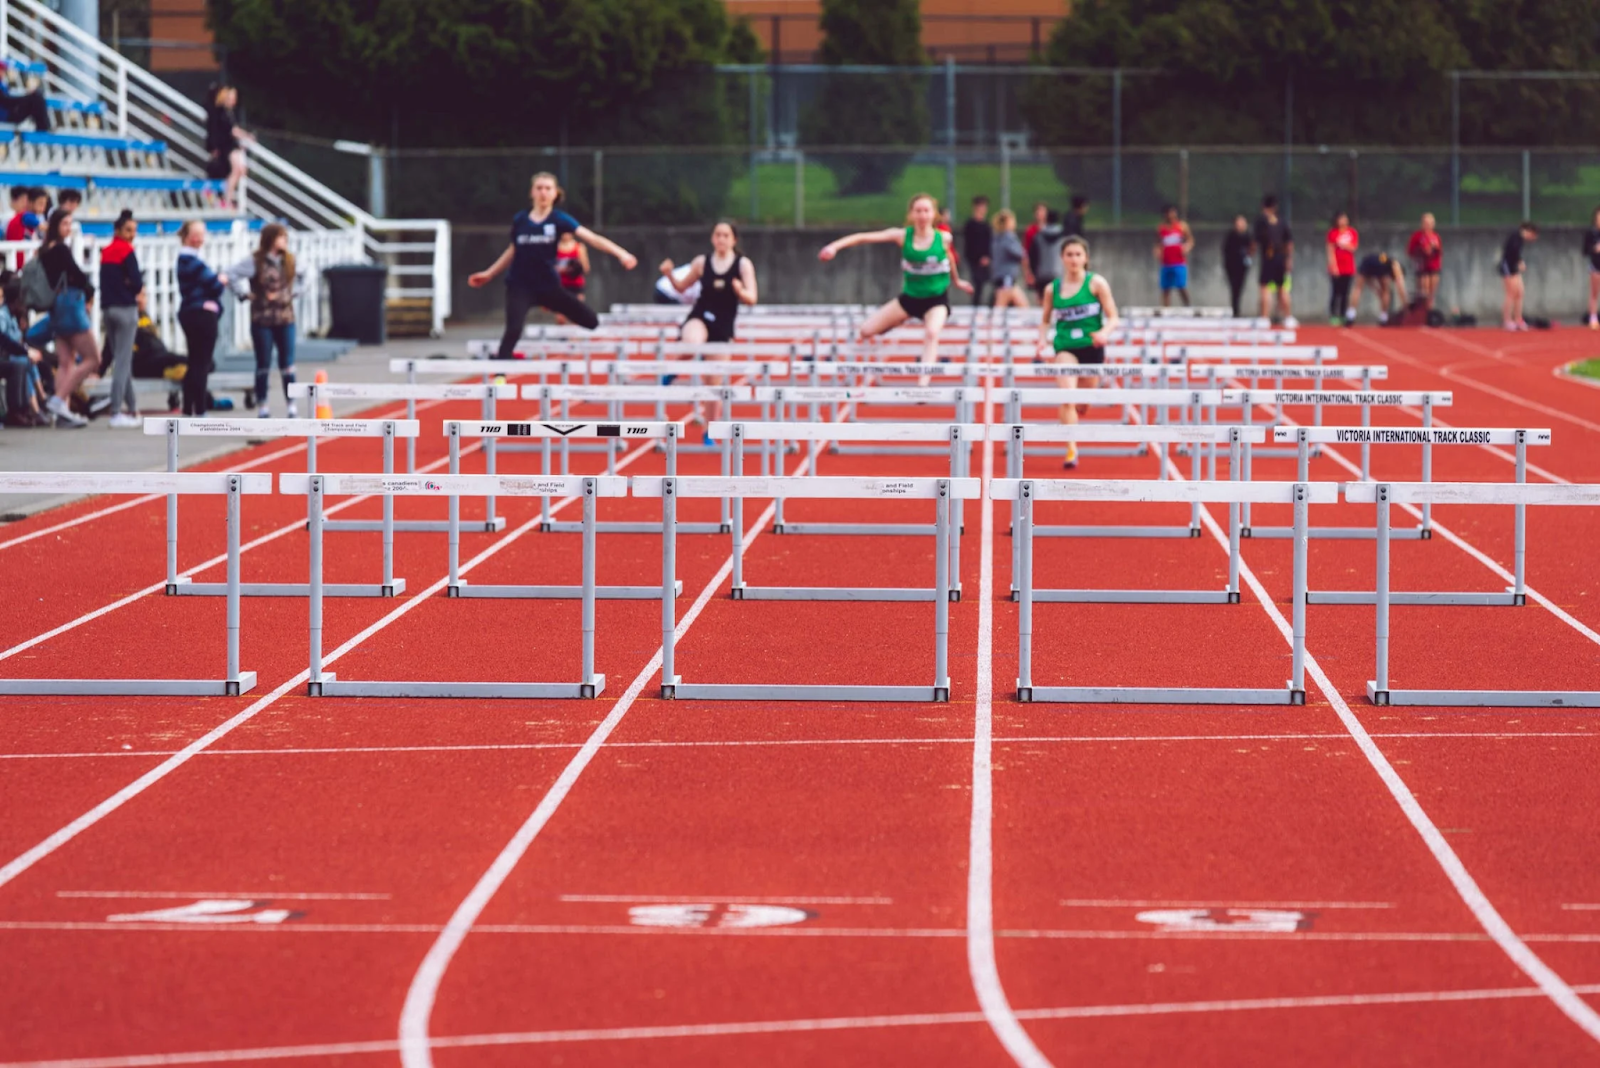 Athletes jumping over hurdles on track and field.